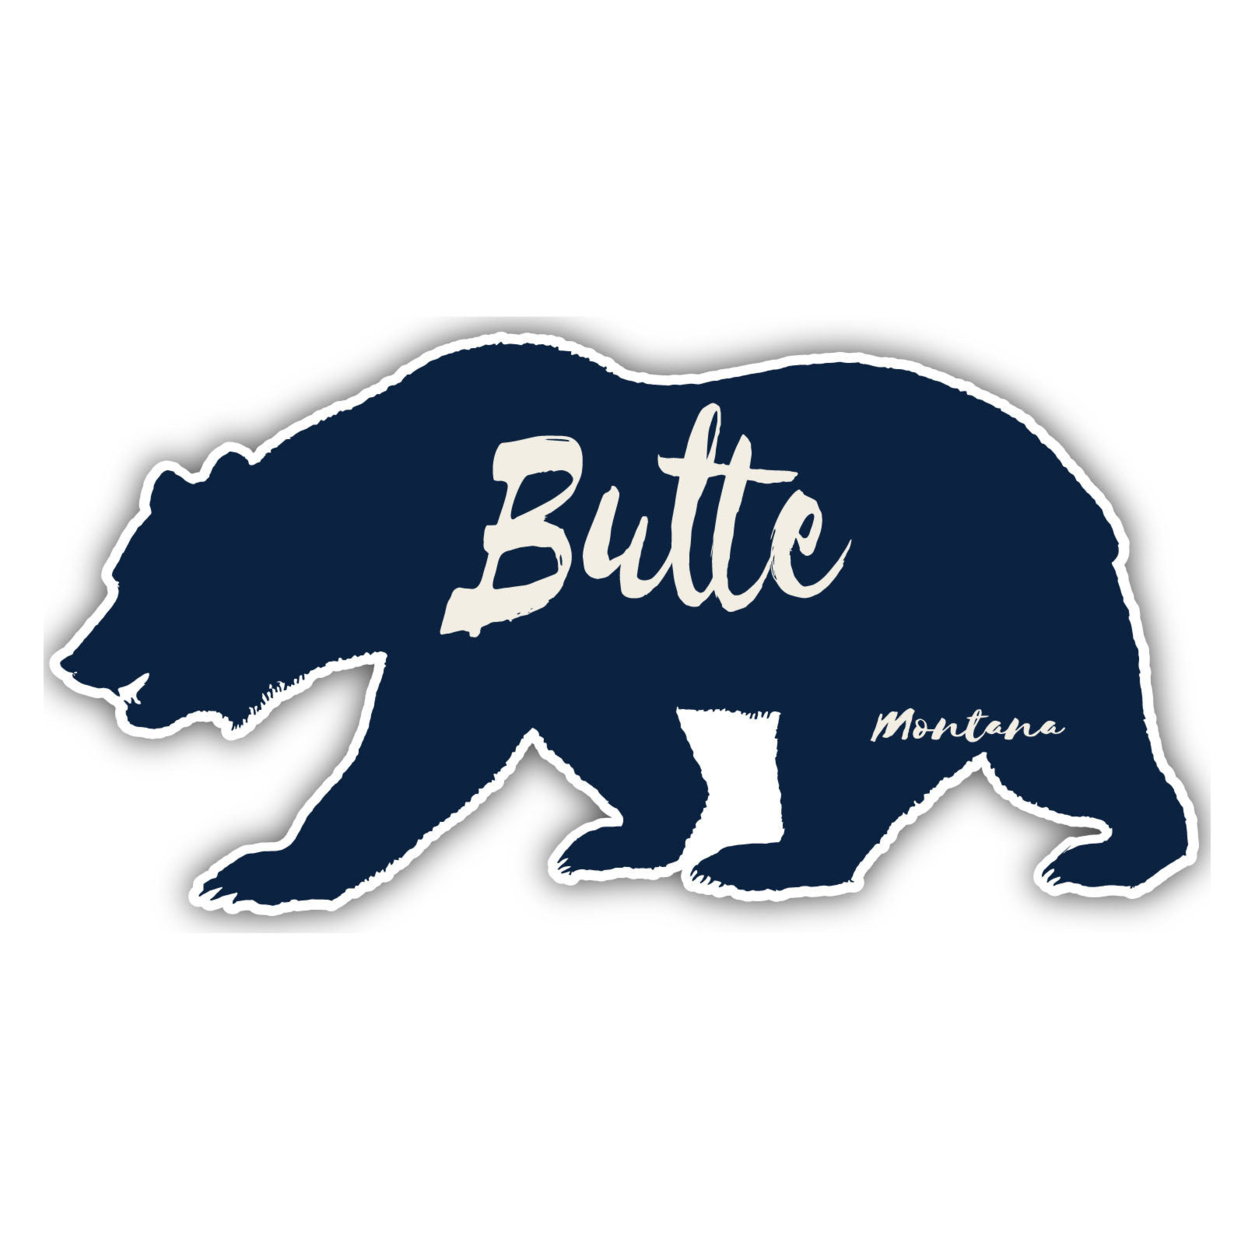 Butte Montana Souvenir Decorative Stickers (Choose Theme And Size) - 4-Pack, 8-Inch, Camp Life